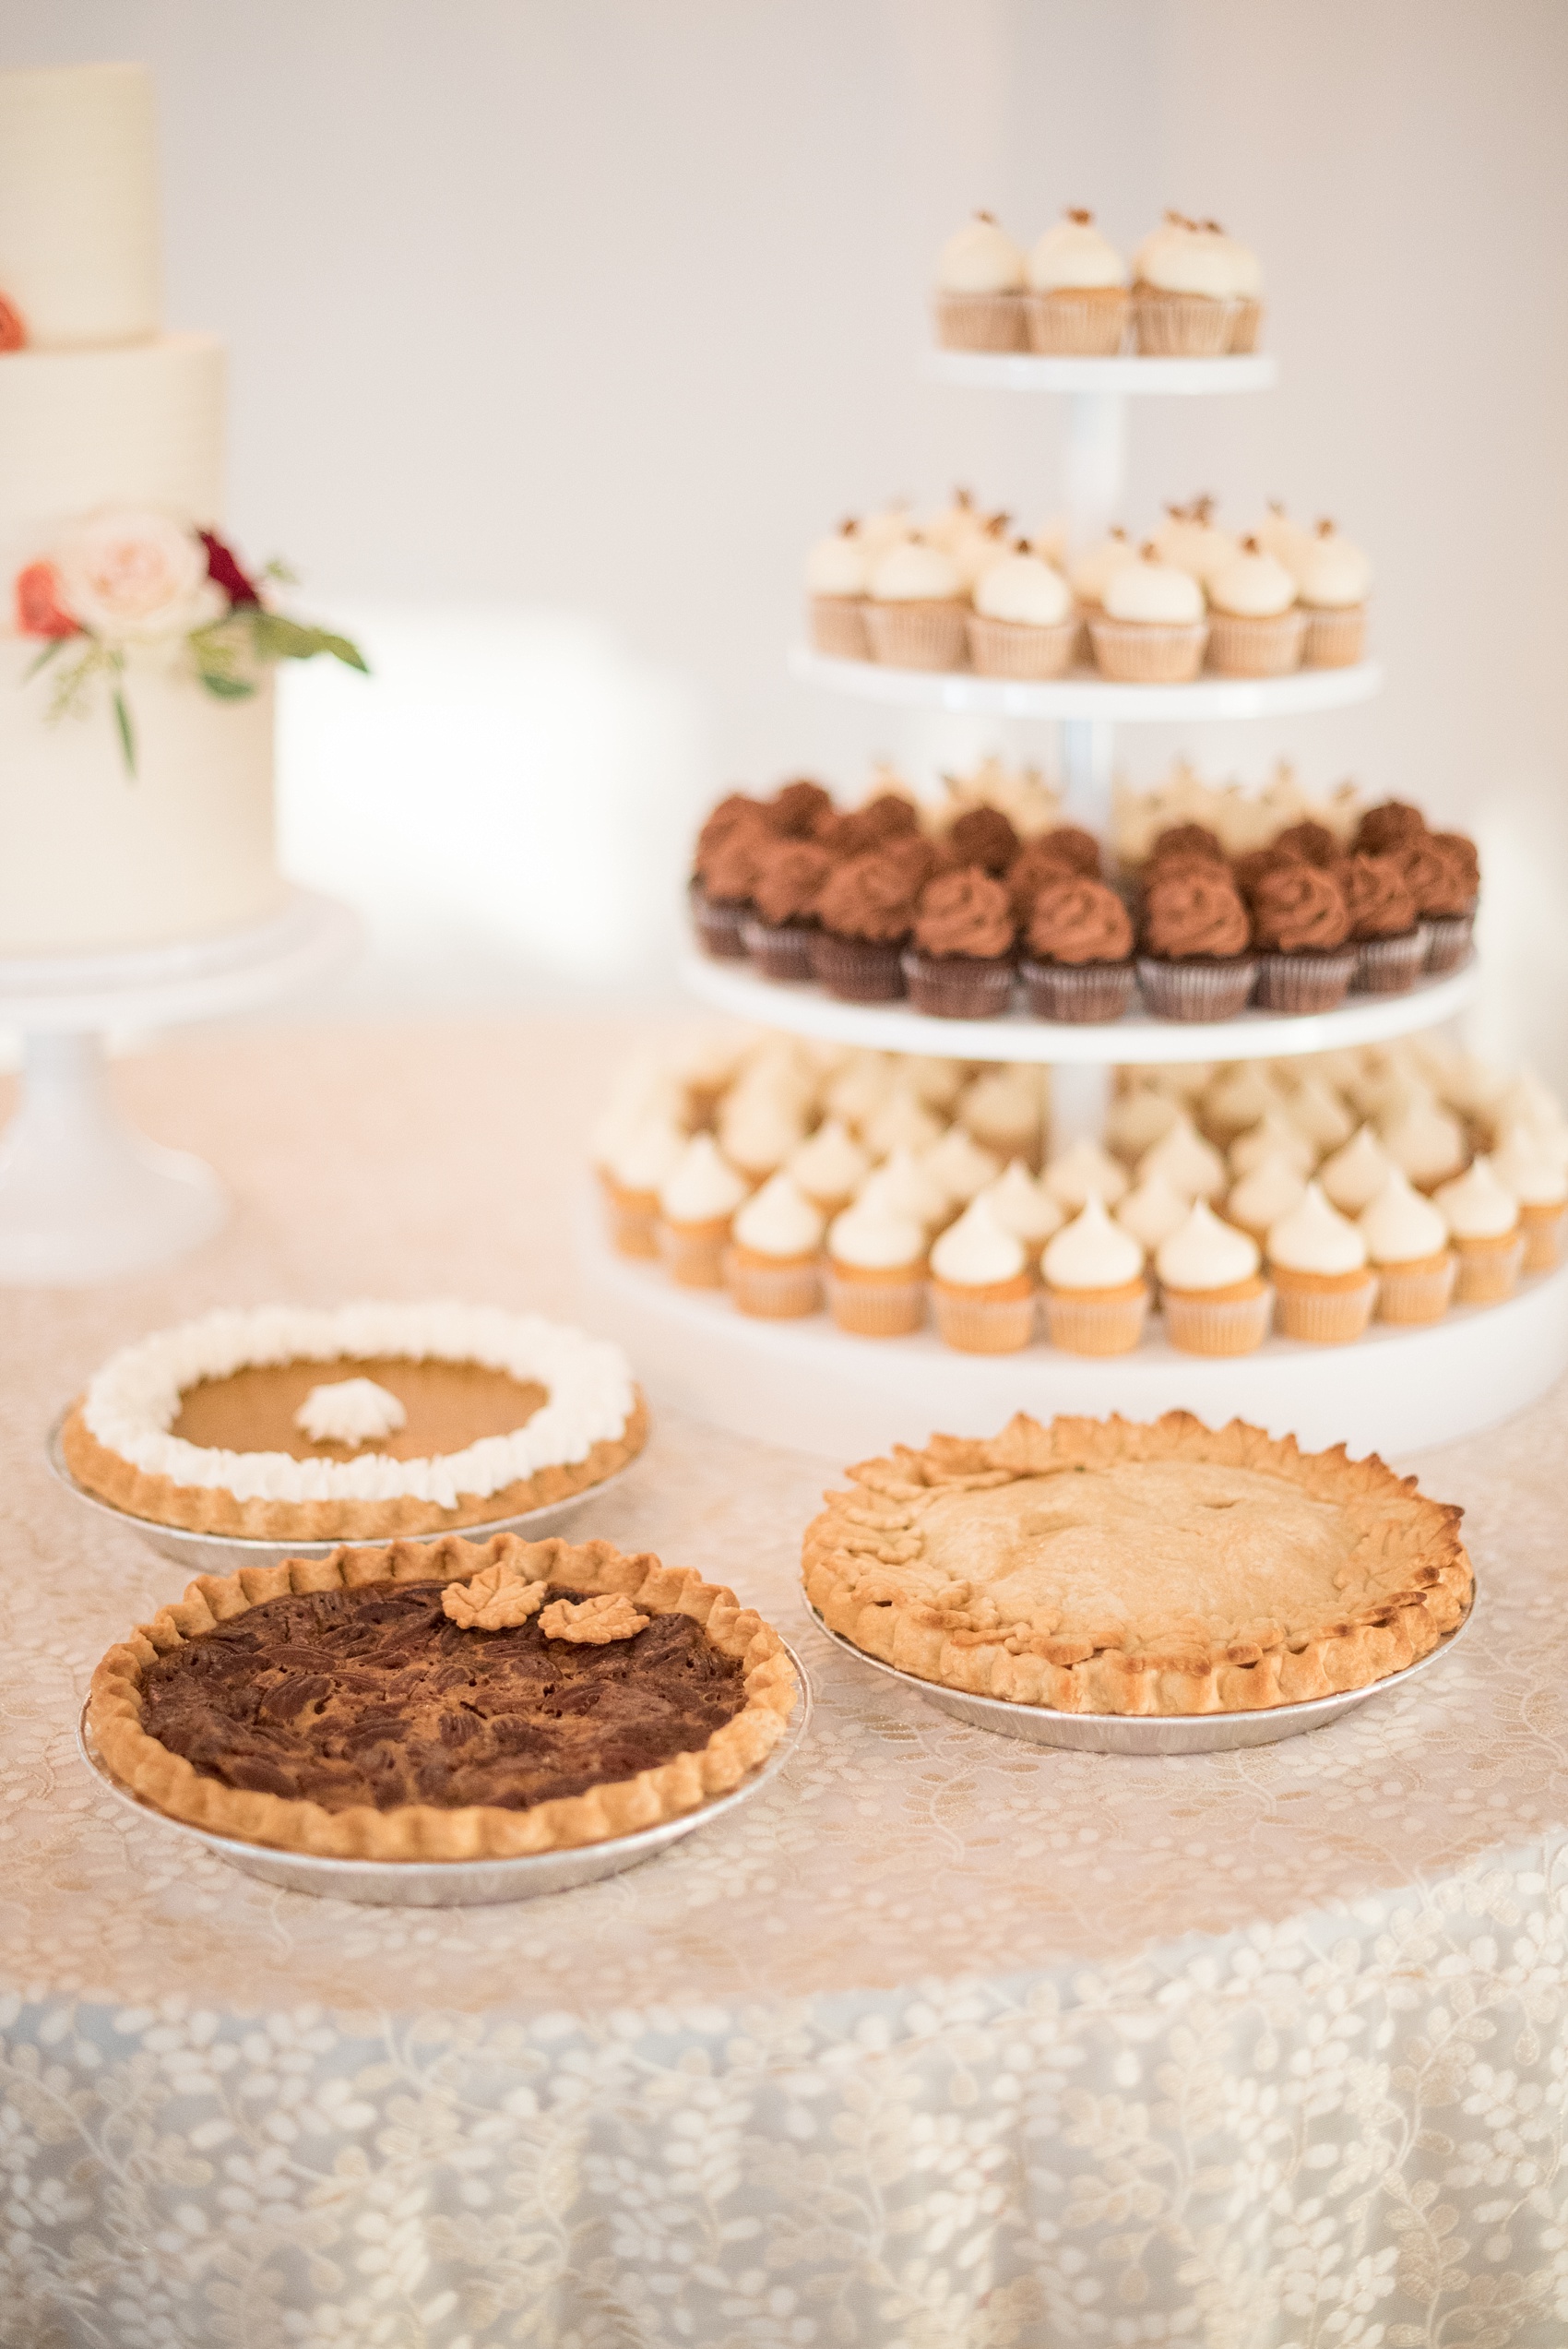 Mikkel Paige Photography photos from a Merrimon-Wynne House wedding in Raleigh. Slice Pie Company provided fall desserts and The Cupcake Shoppe created a tower with chocolate, vanilla and pumpkin spice mini-cupcakes.